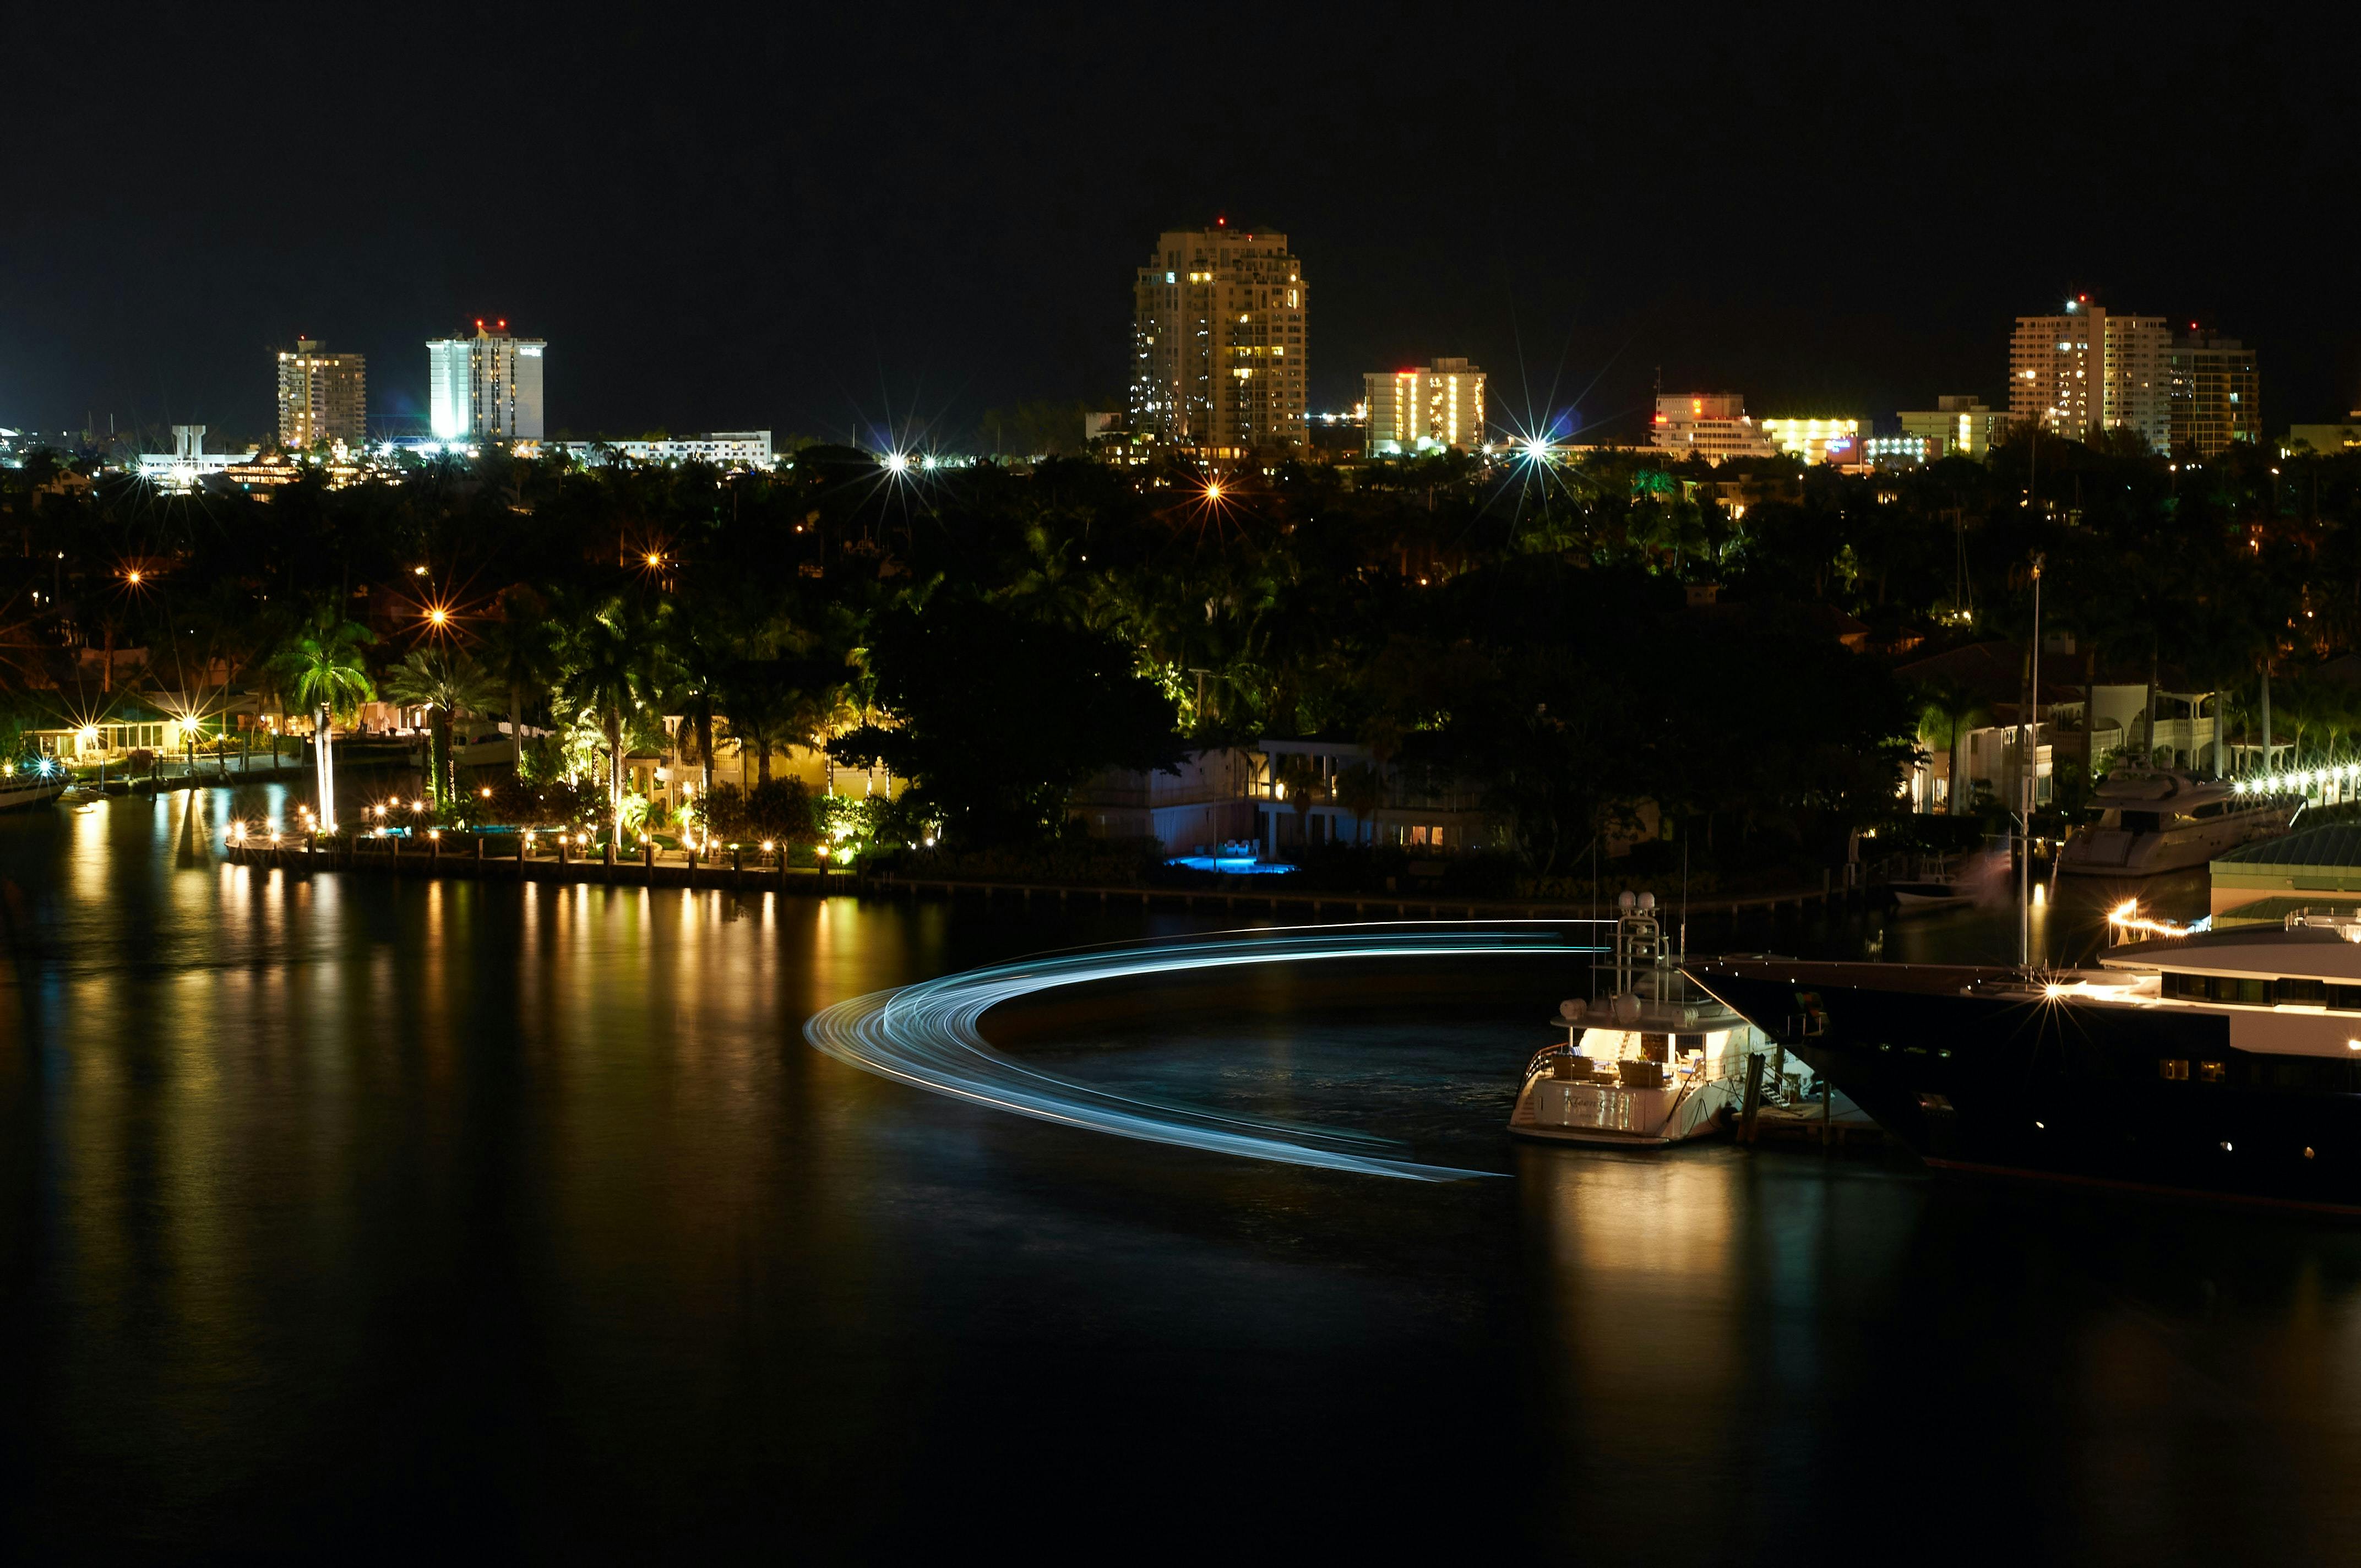 Fort Lauderdale at night